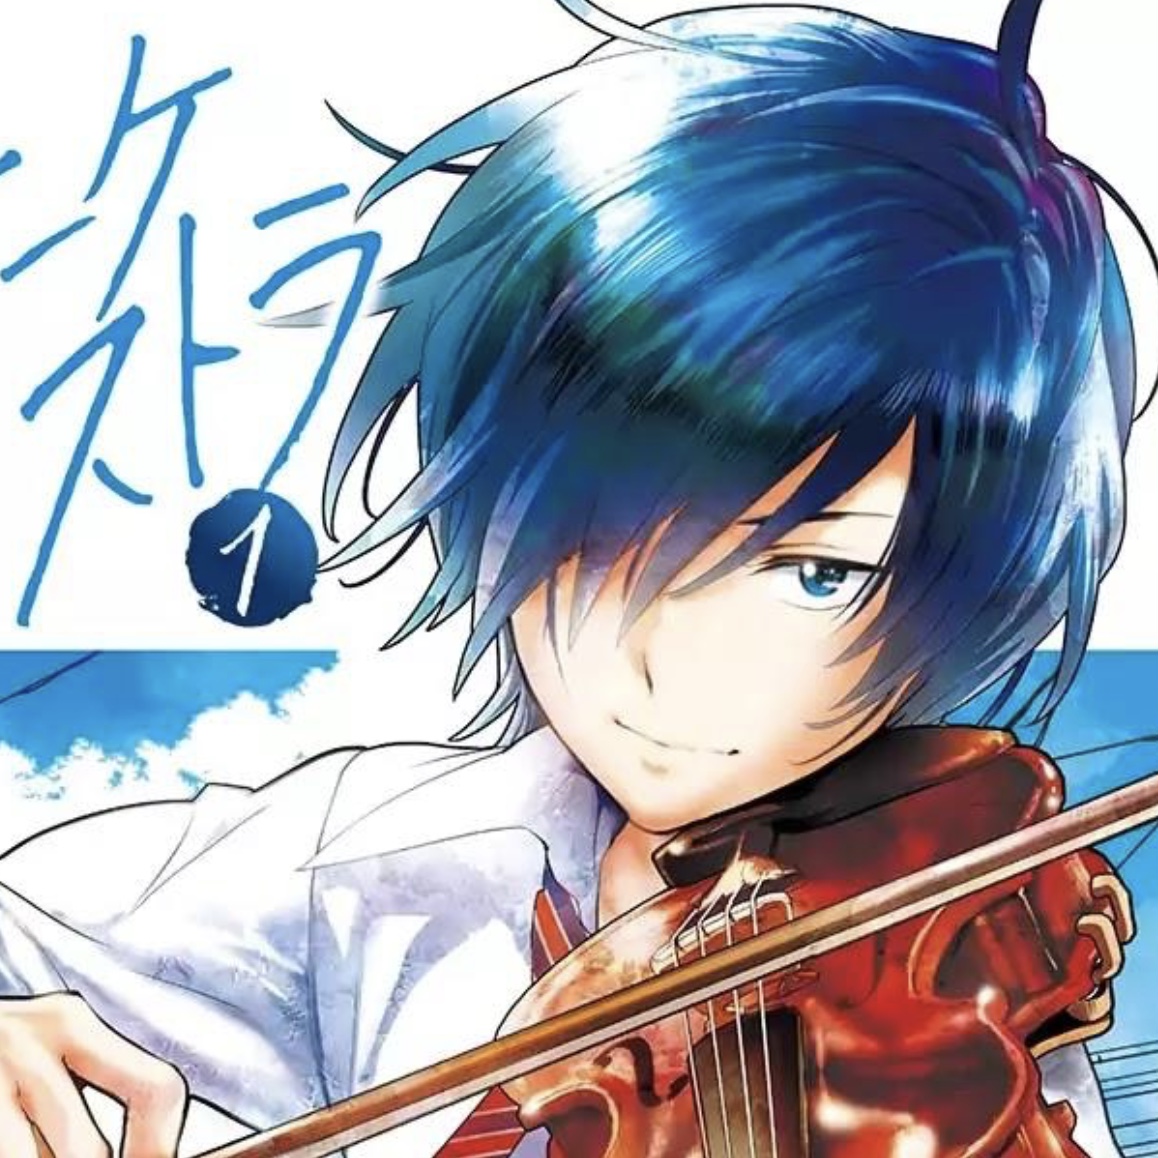 Blue Orchestra Anime Set To Premiere On April 9 - Anime Explained